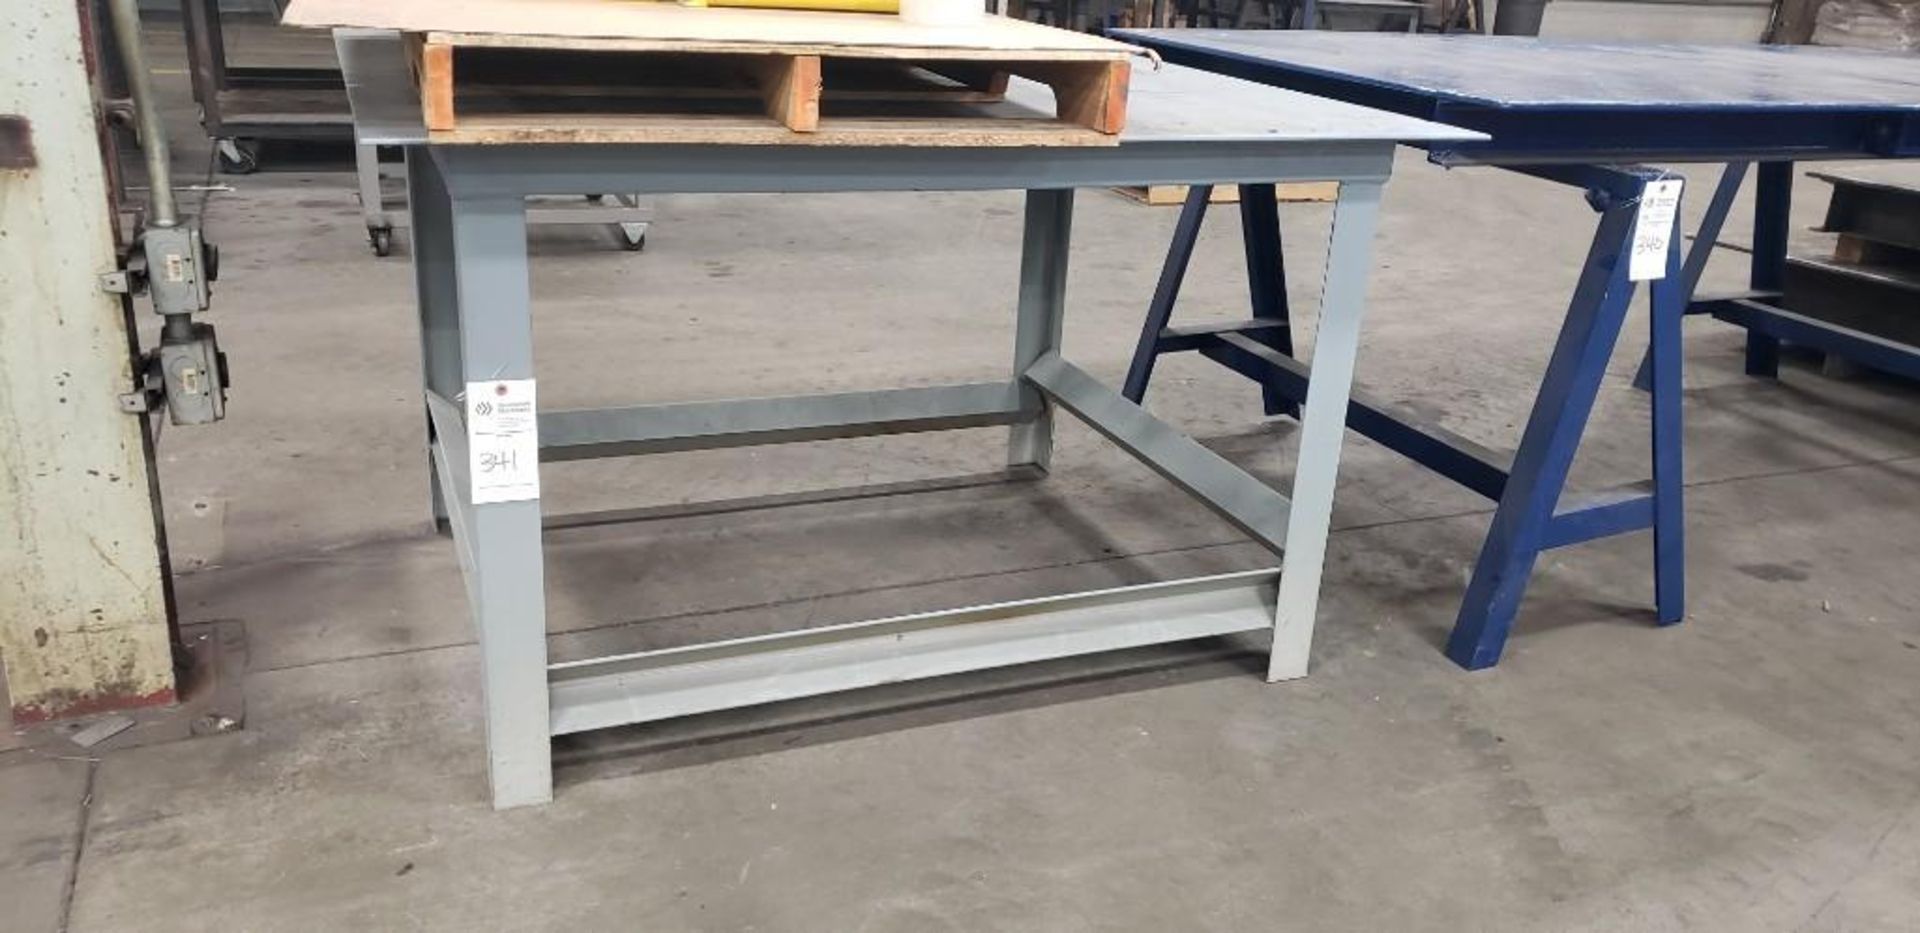 STEEL TABLE 50"X60" 1/4" PLATE TOP 36.5" HIGH